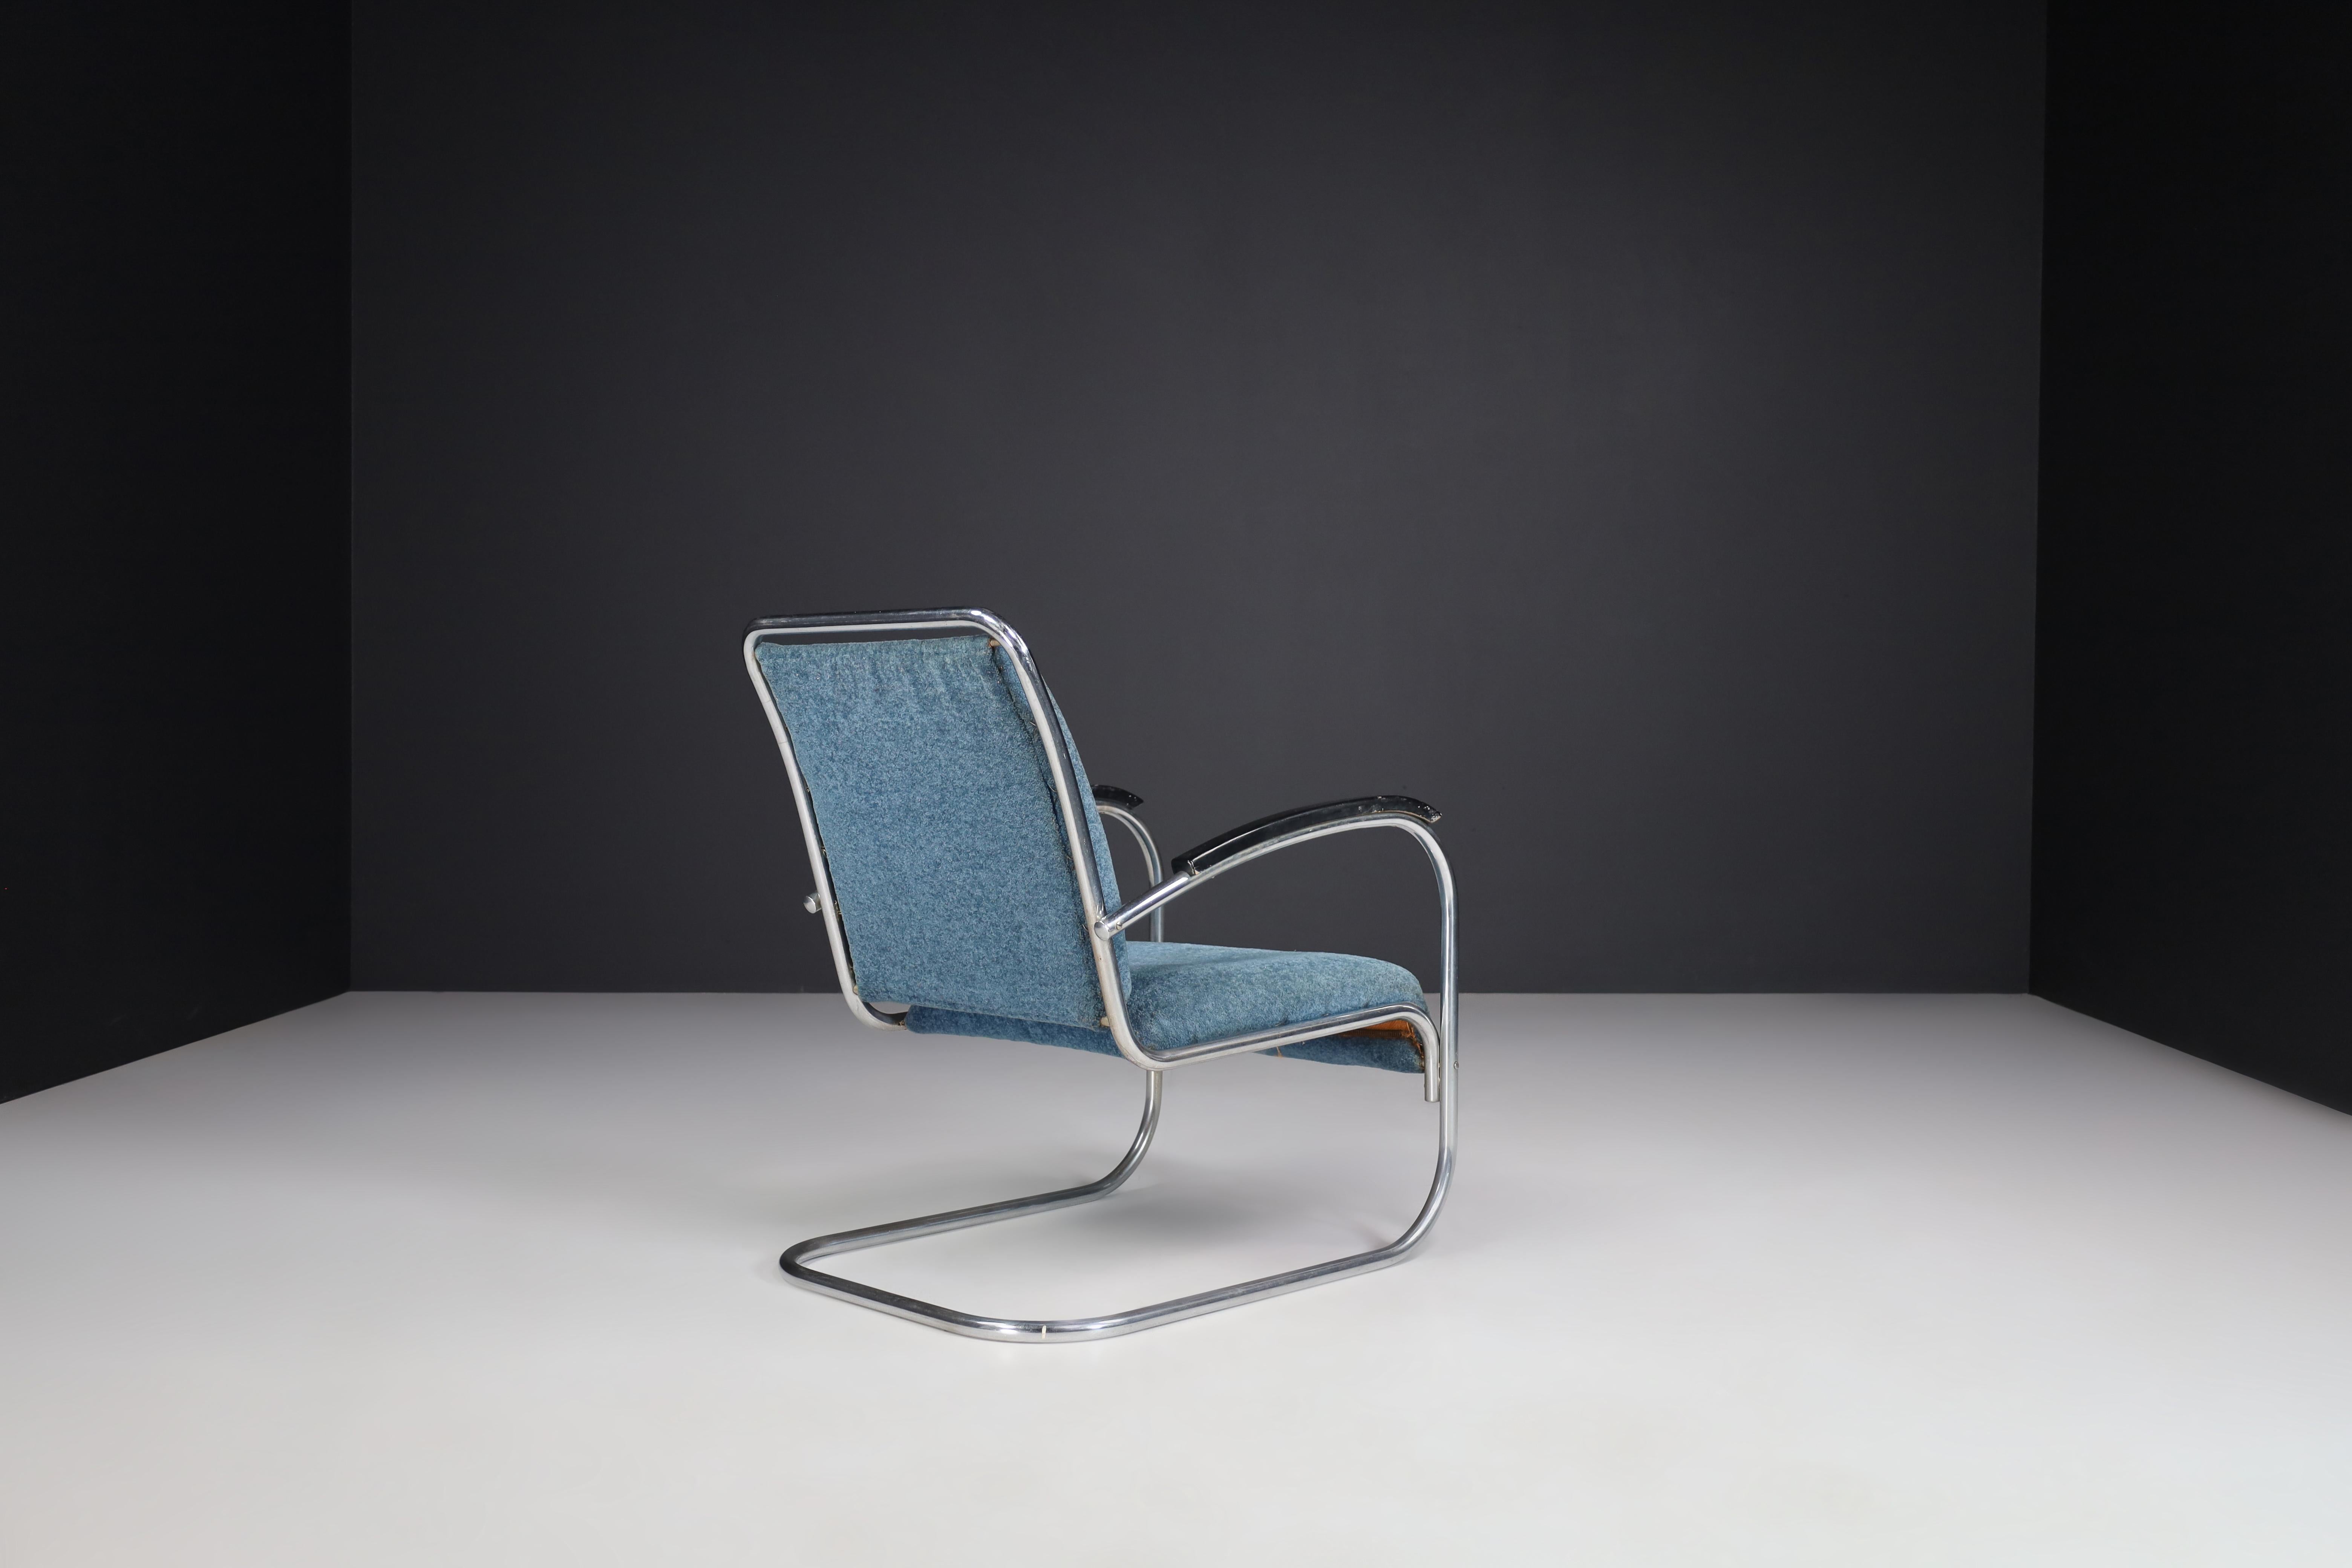 20th Century Bauhaus Cantilever Lounge Chair by Paul Schuitema, The Netherlands 1930s